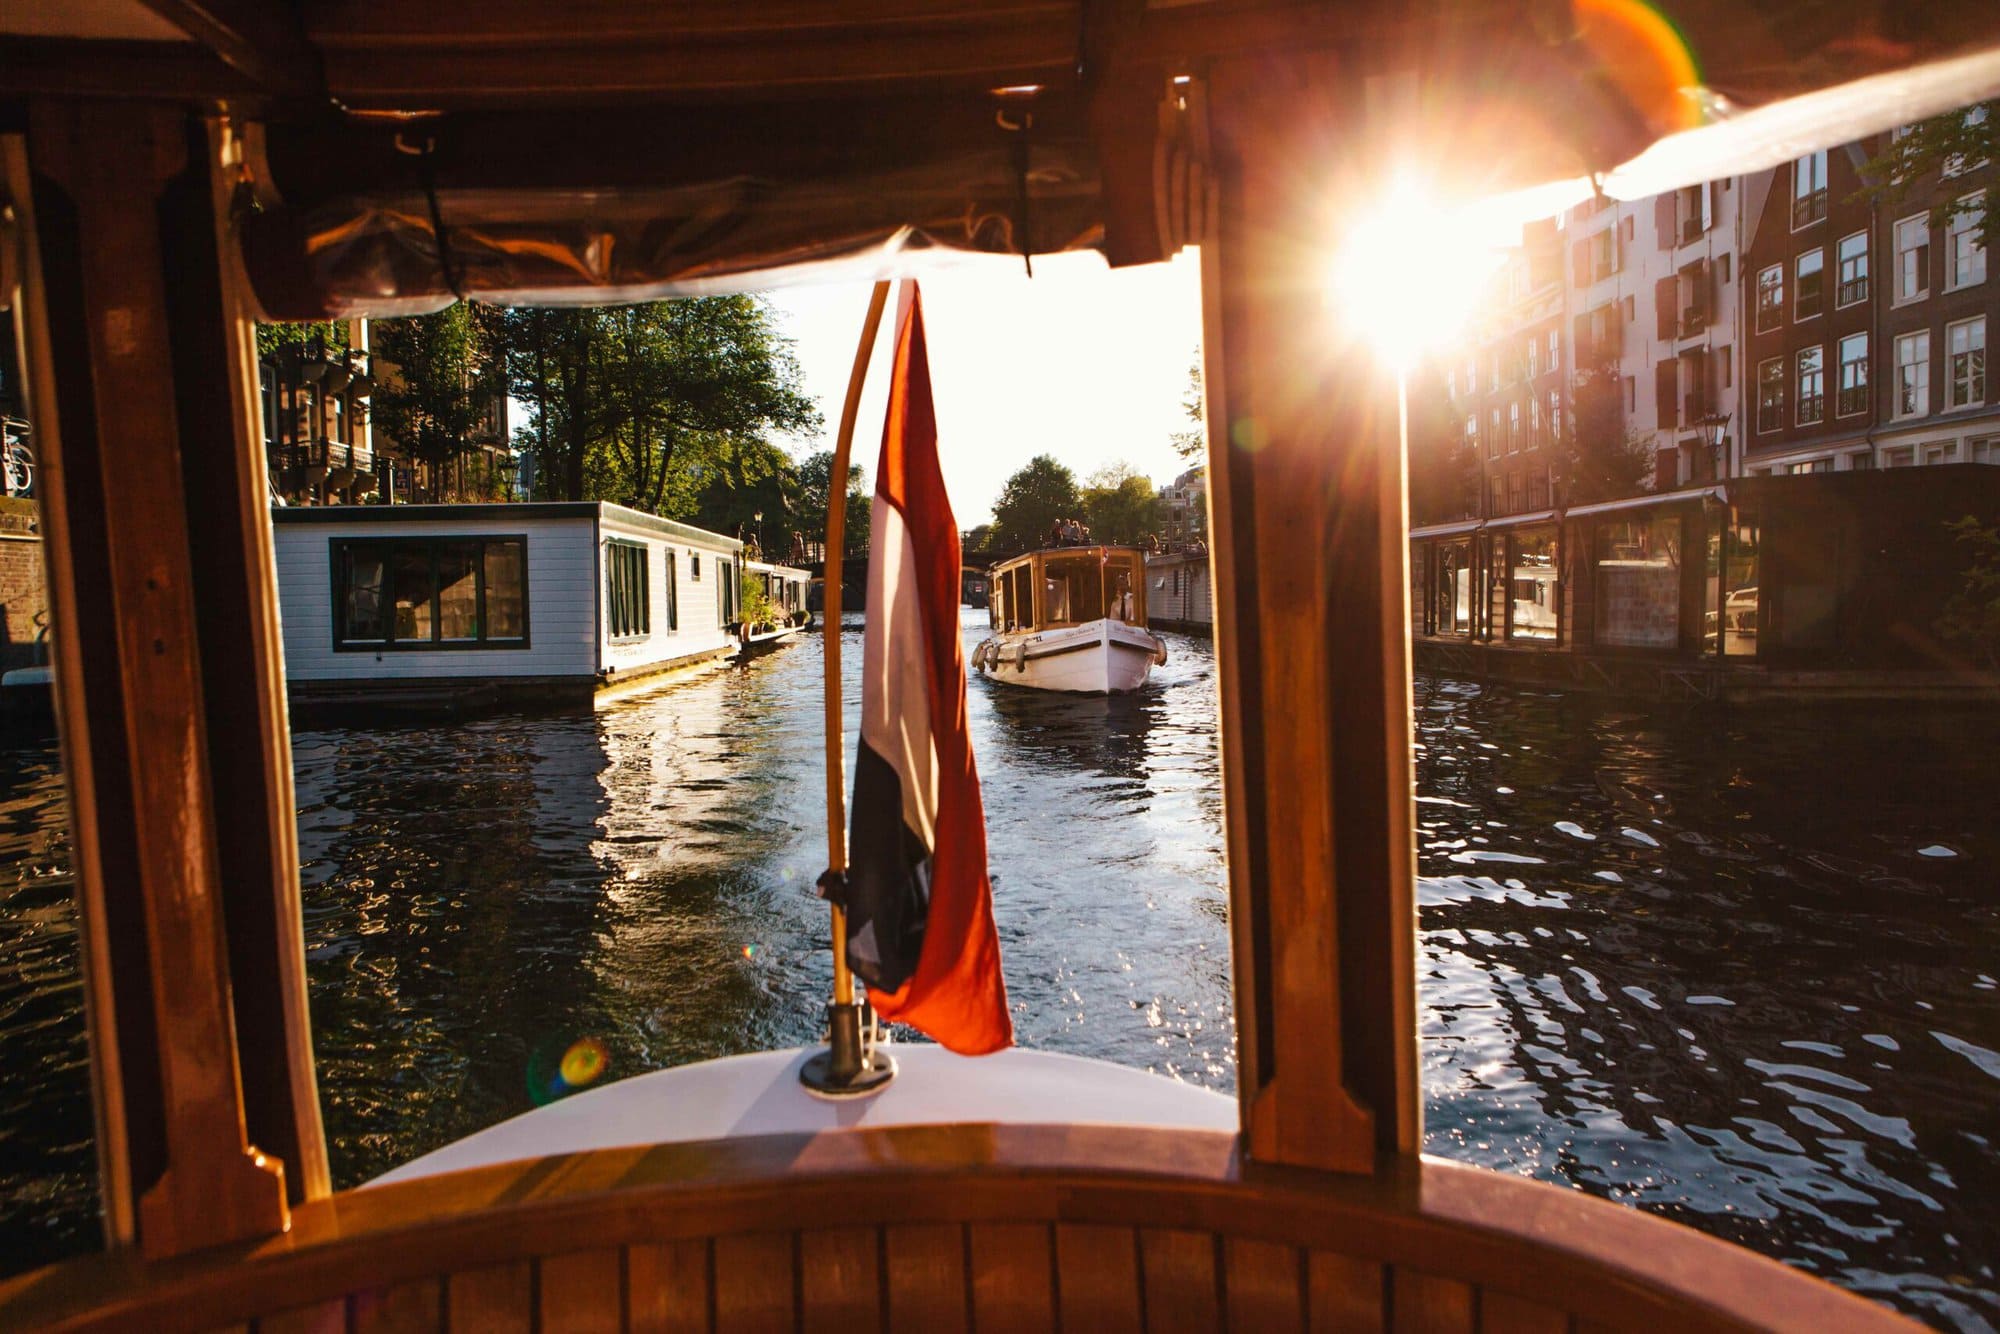 The view from the boat, de Muze, at the canal of Amsterdam. The boat is owned and possible to rent by The Dylan Amsterdam, leading hotels of the world.